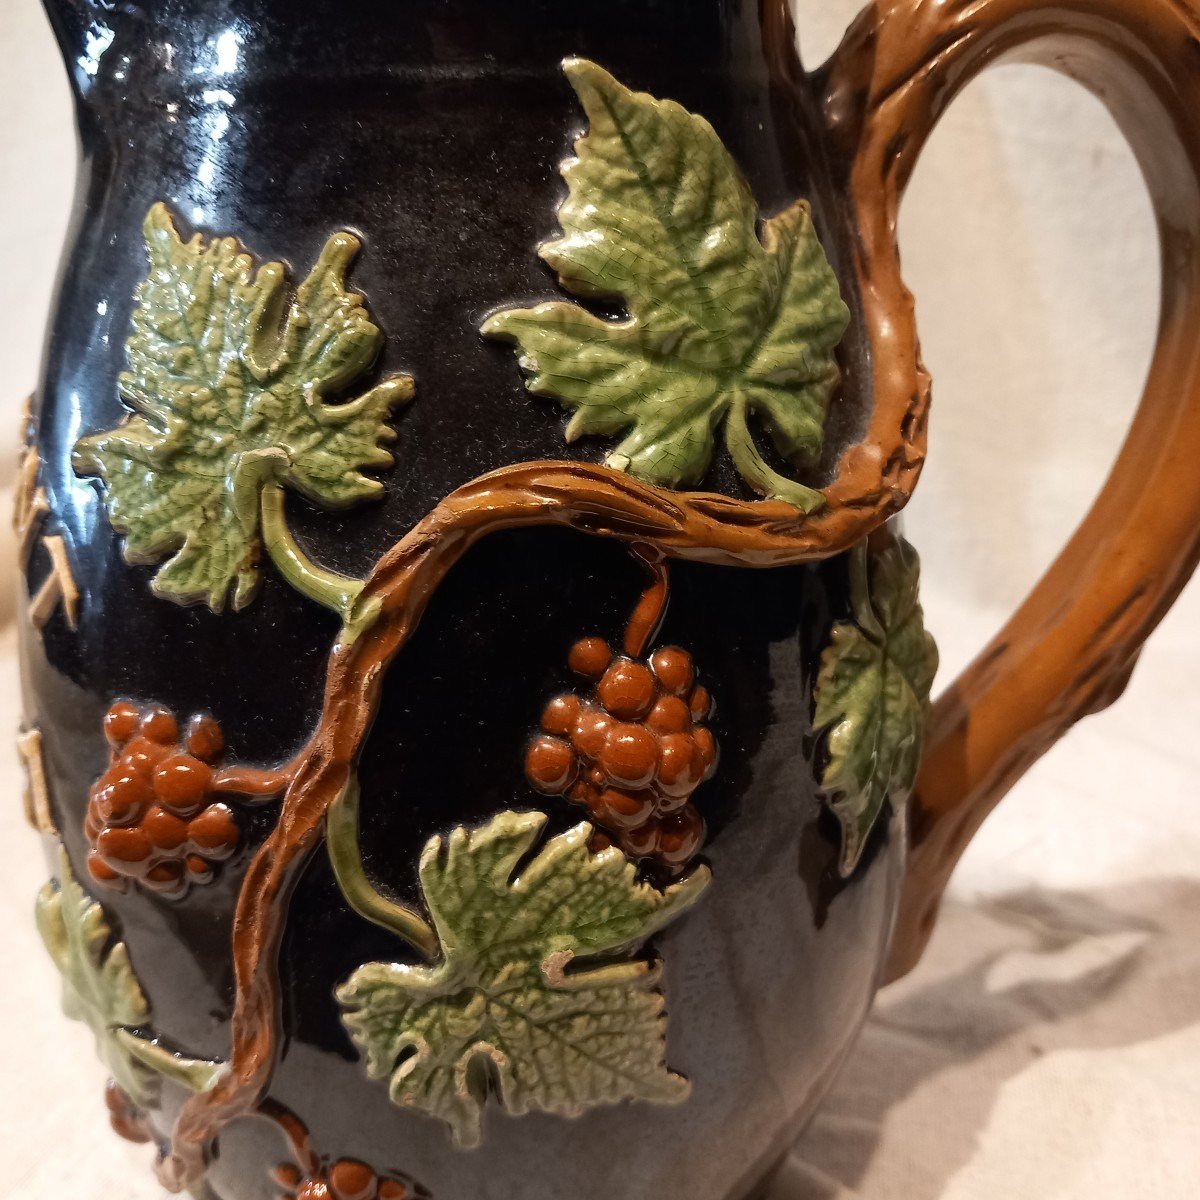 Two Winegrowers' Surname Pitchers, Glazed Terracotta, Early 20th Century.-photo-5